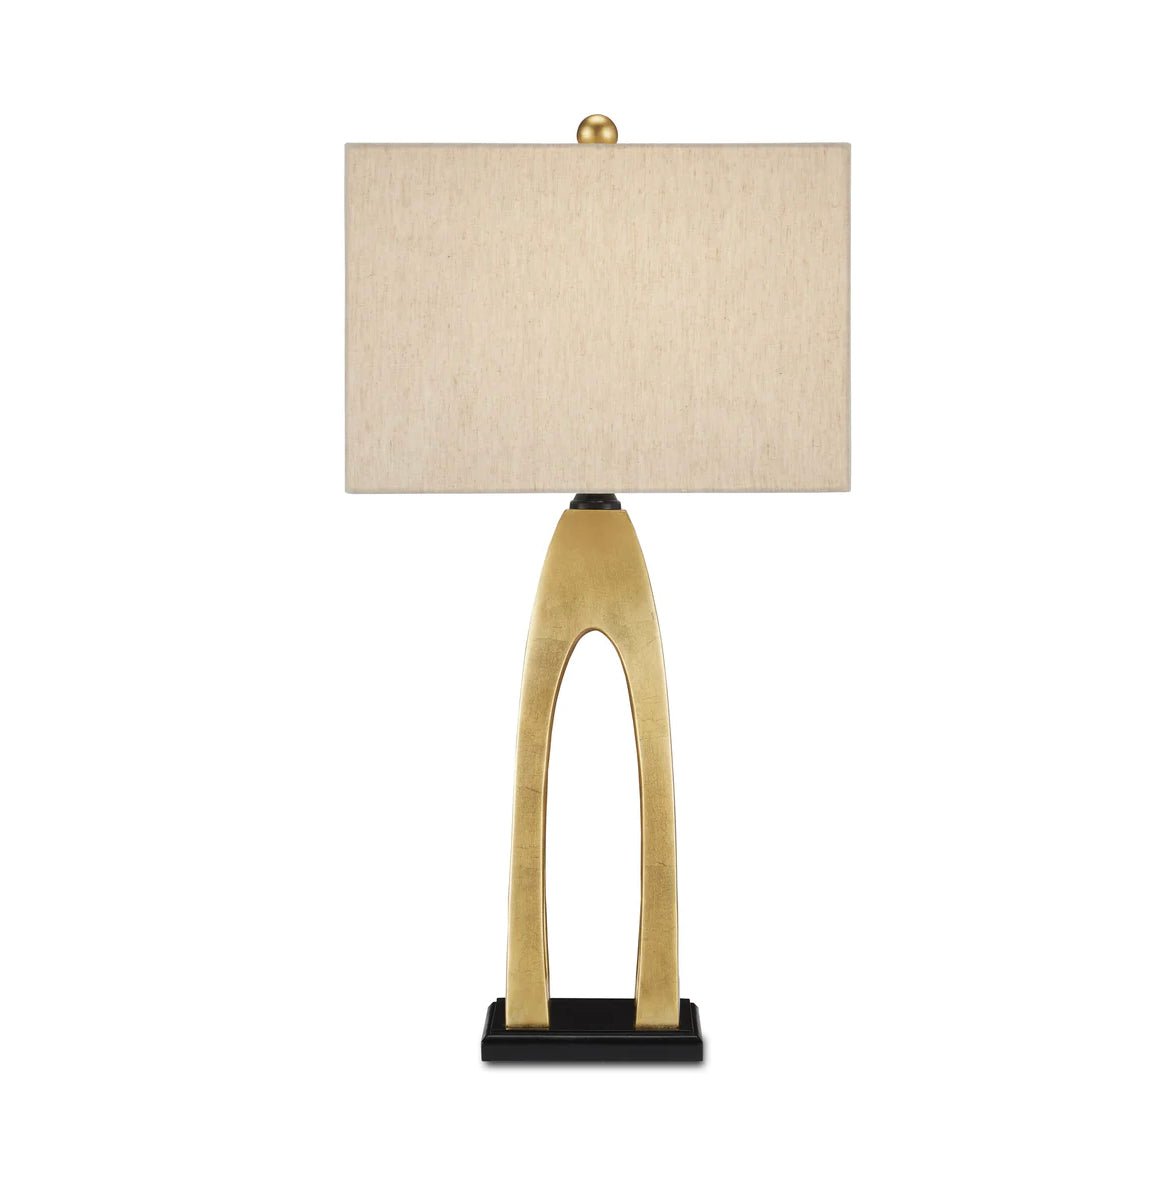 ‘Archway’ Table Lamp - EcoLuxe Furnishings